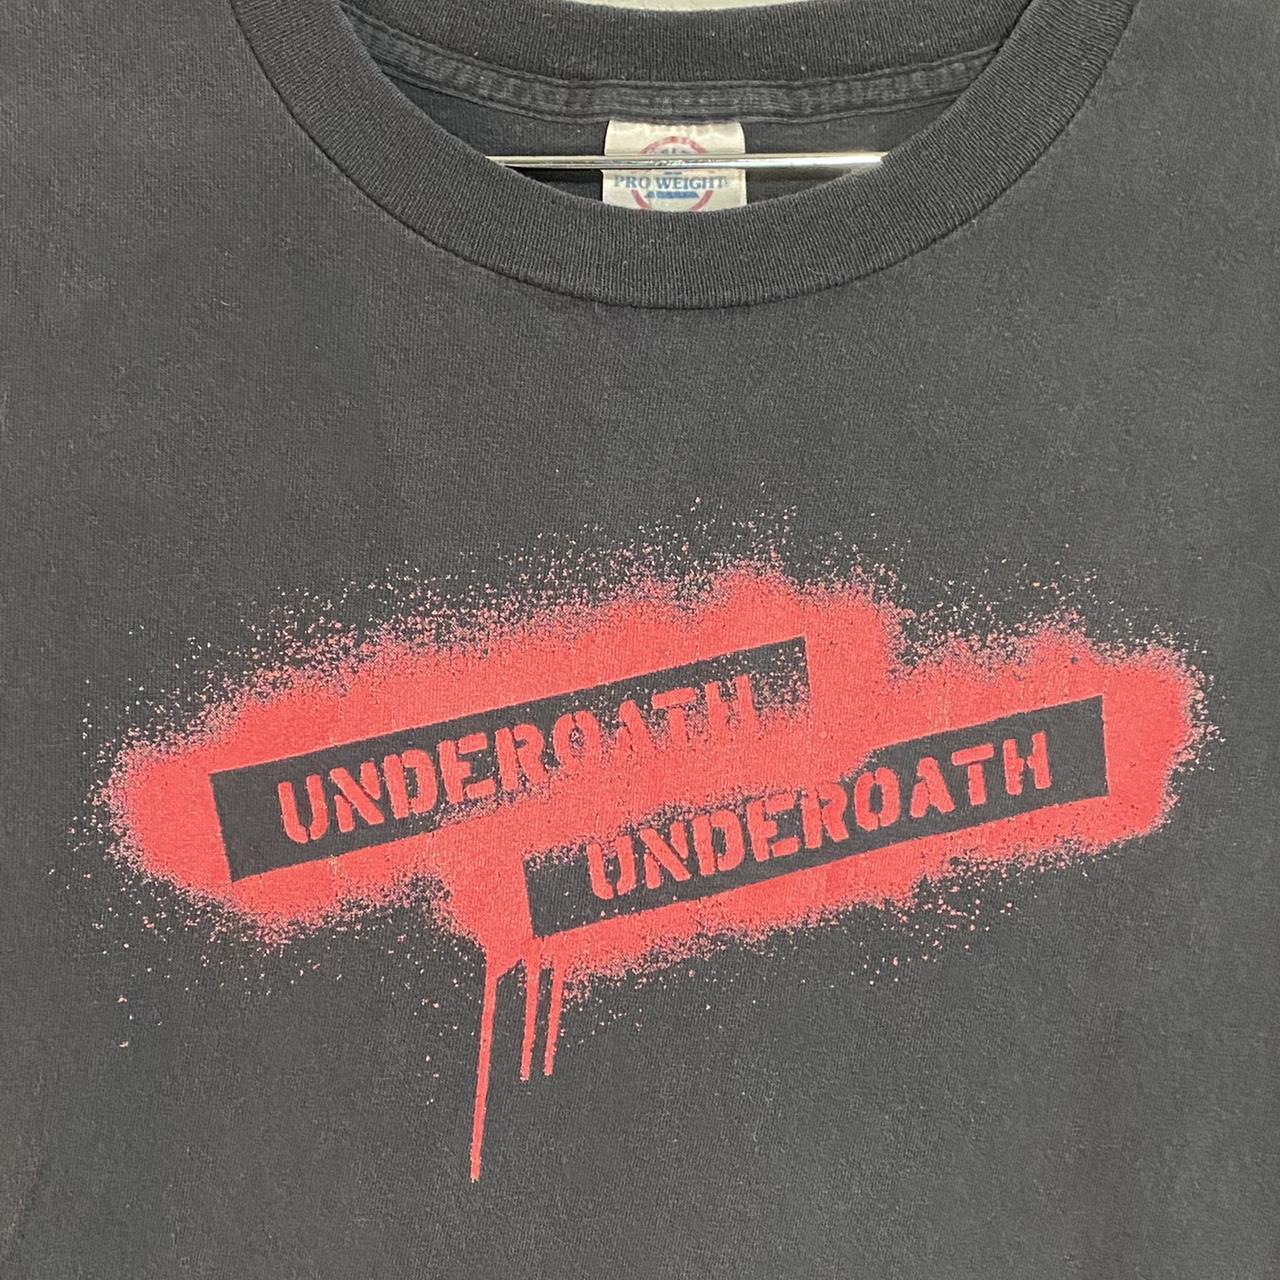 Vintage Underoath Band tee. Black shirt with red... - Depop